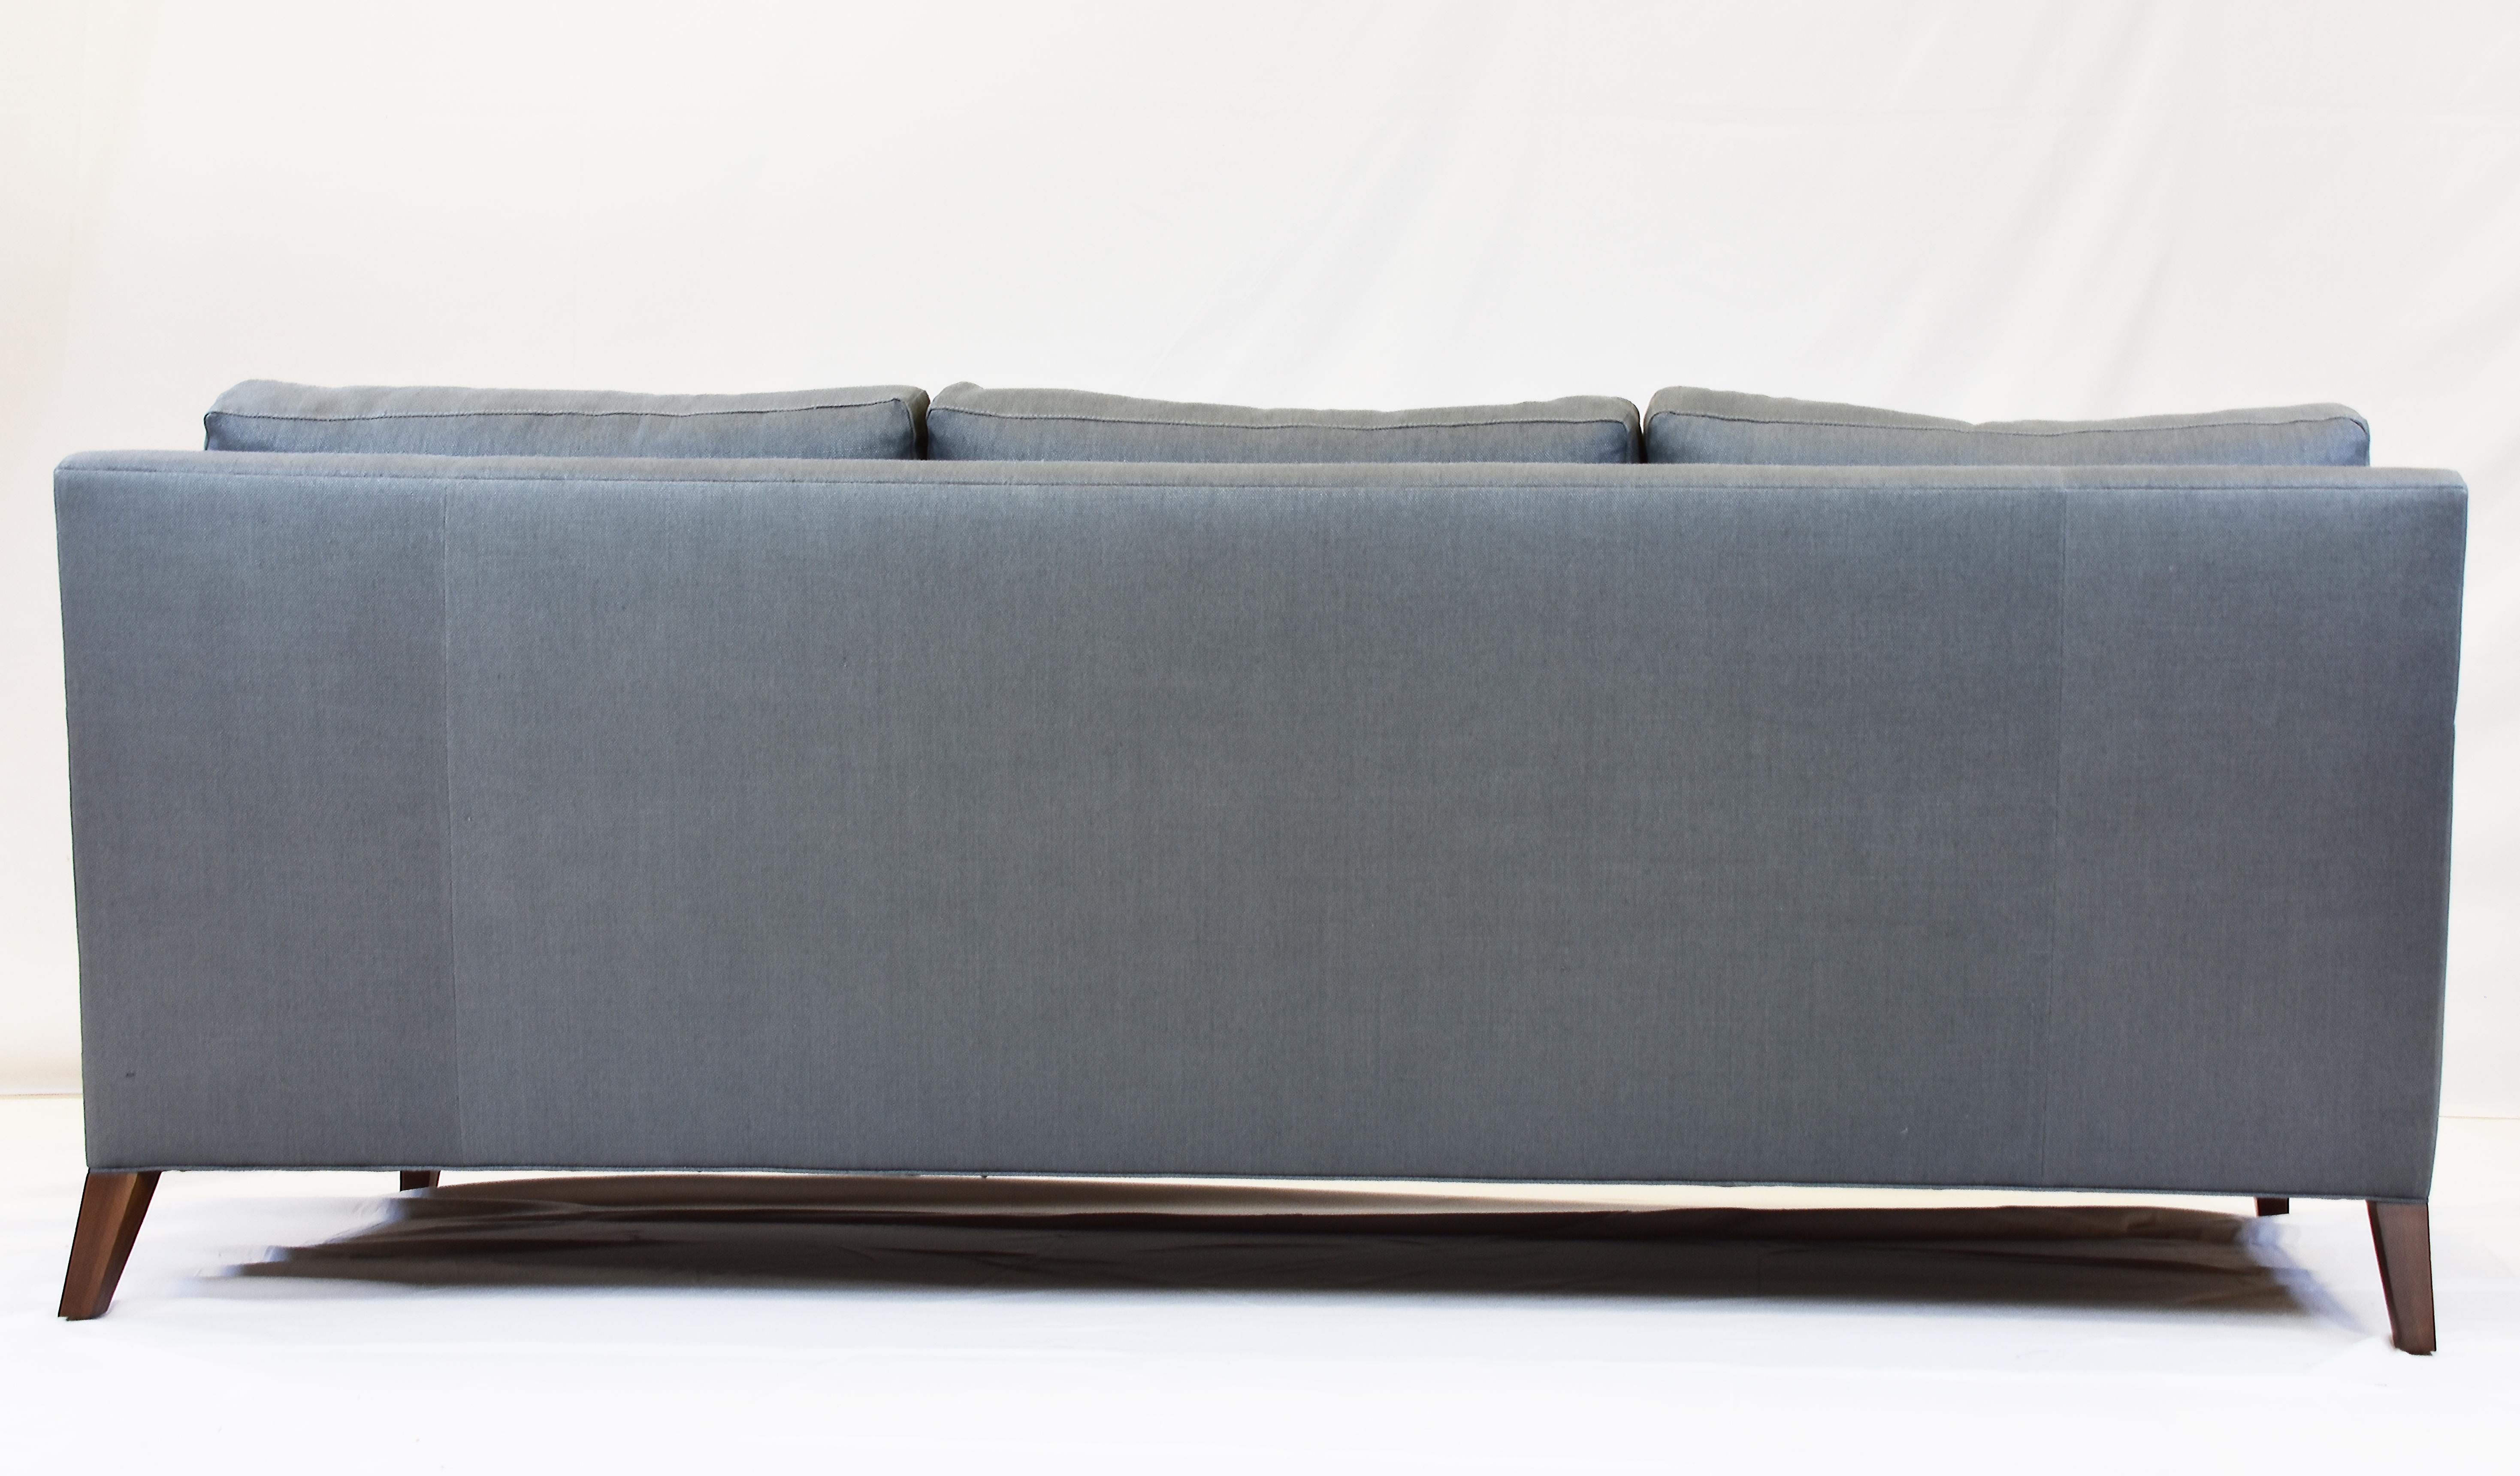 Contemporary Le Jeune Upholstery Hollywood Sofa Showroom Model For Sale